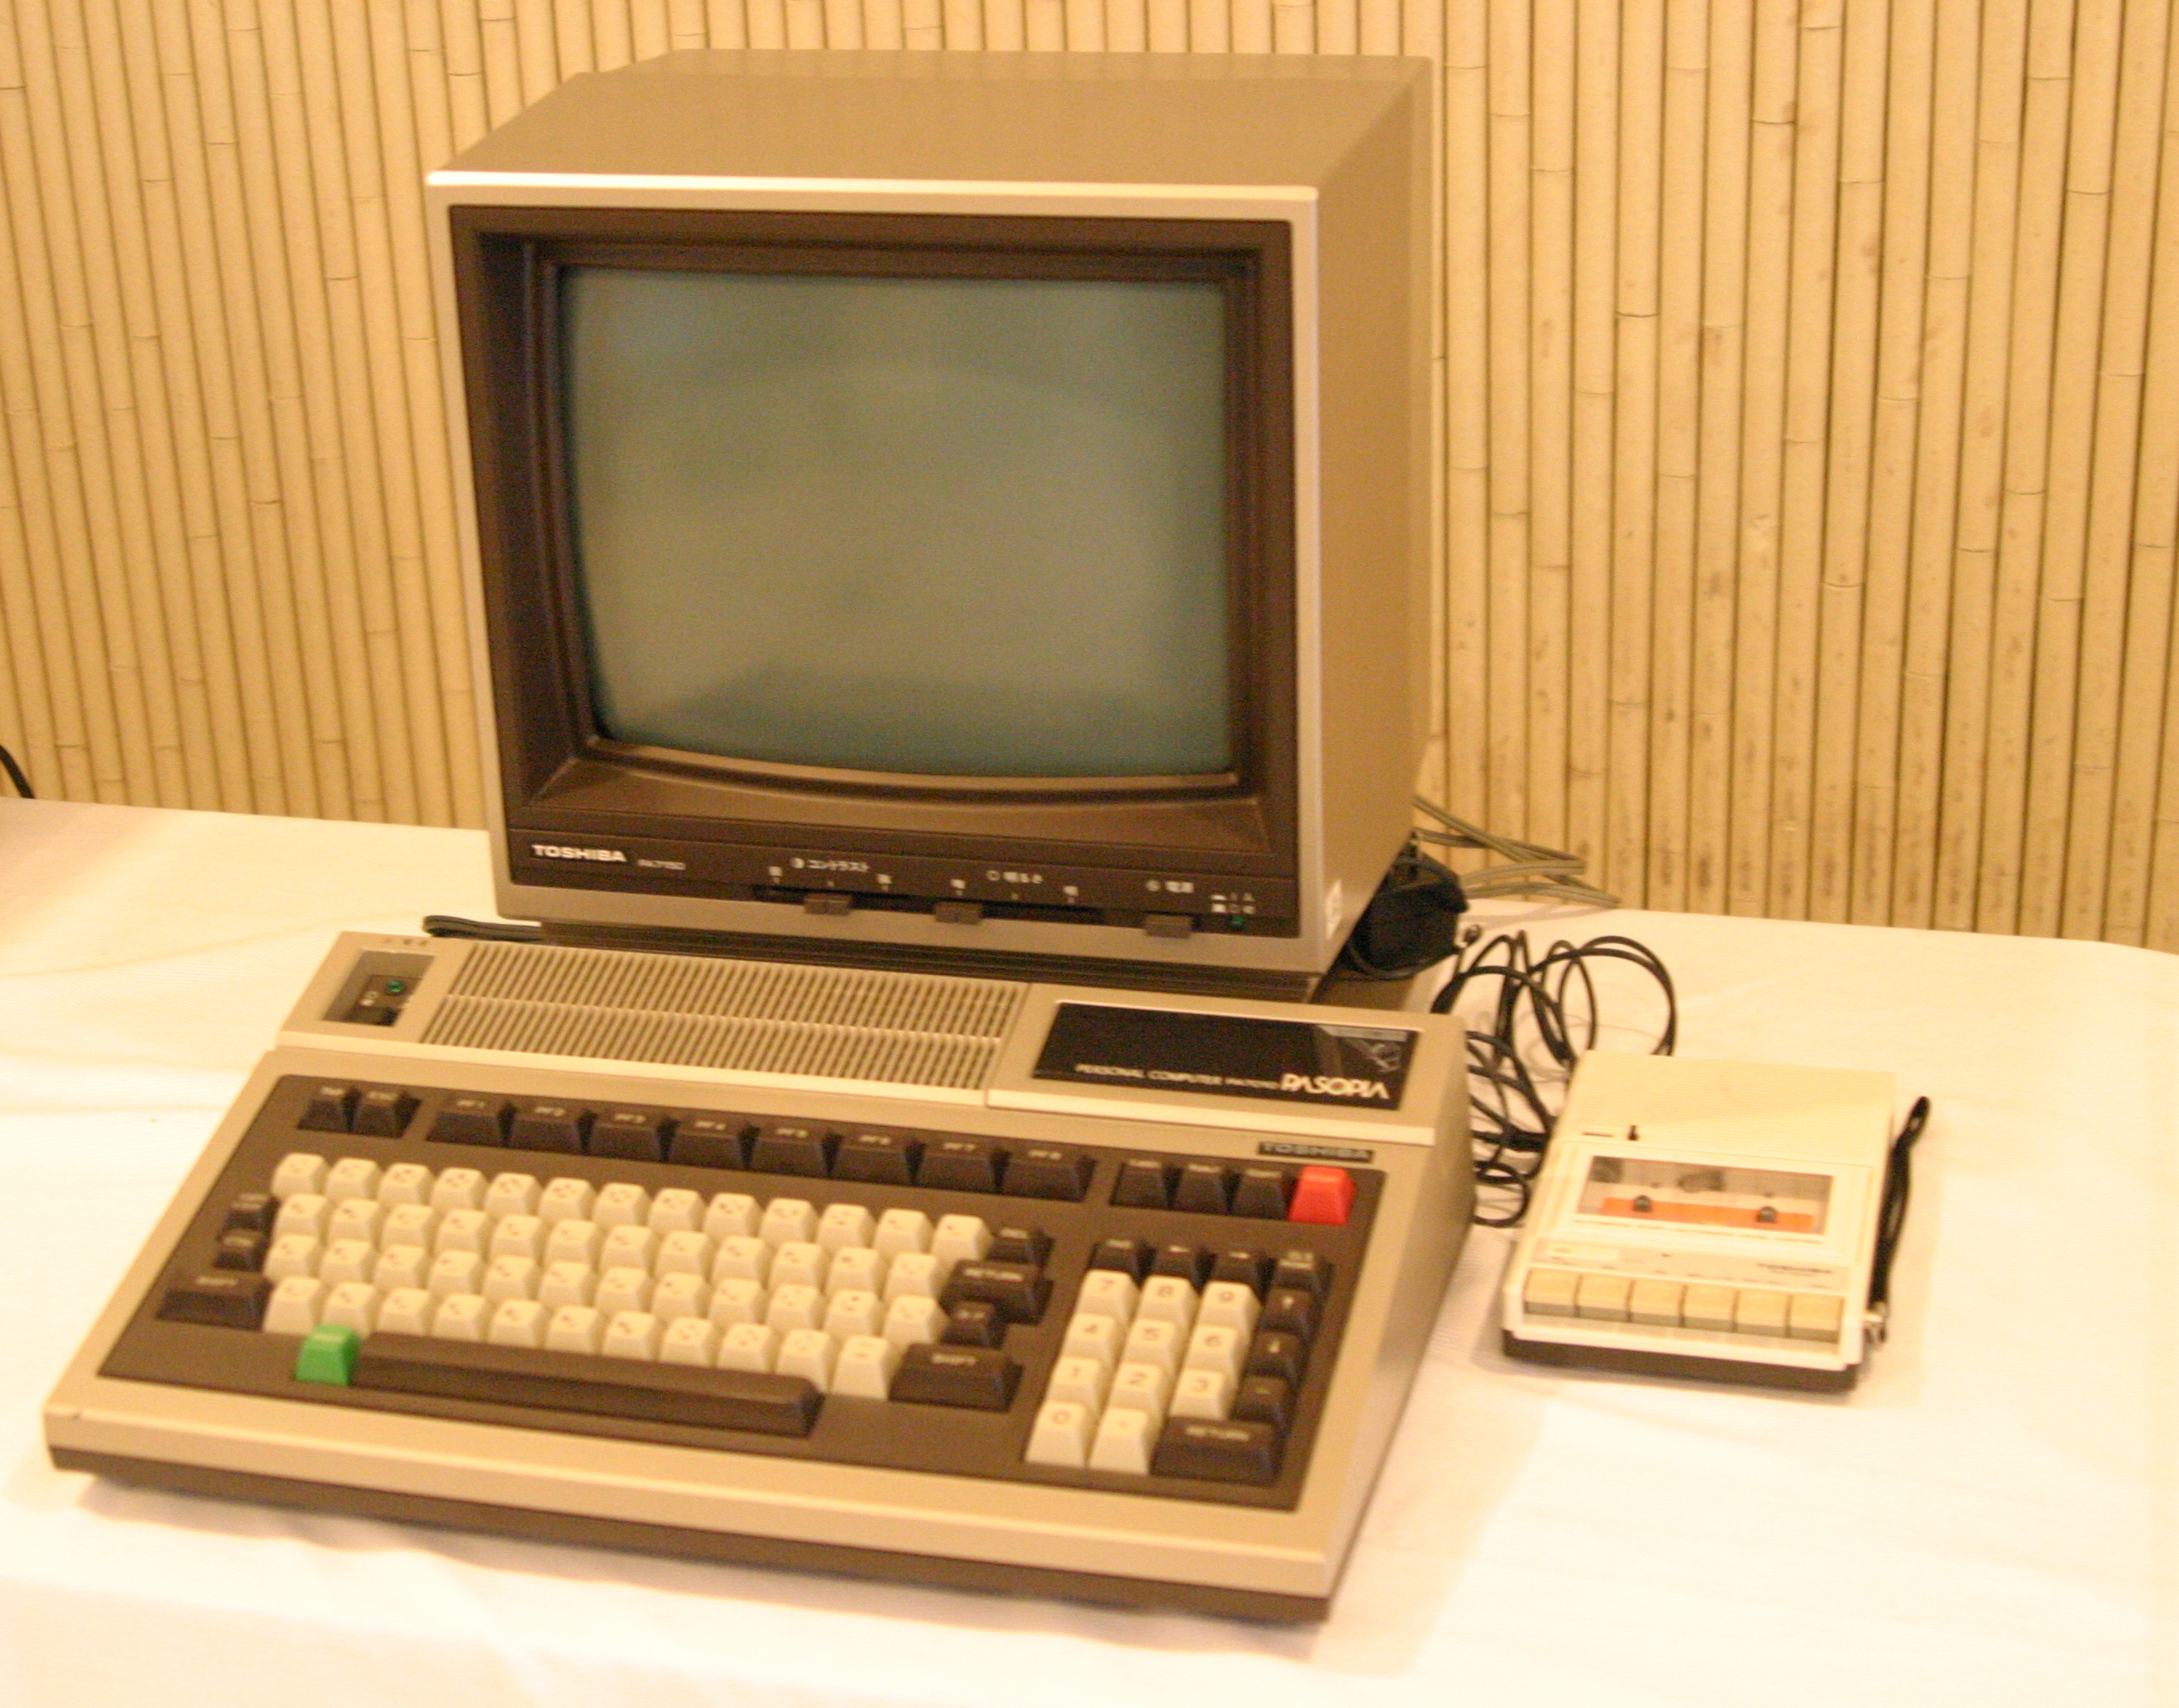 TOSHIBA | Personal Computers | KCG Computer Museum (Satellite of the